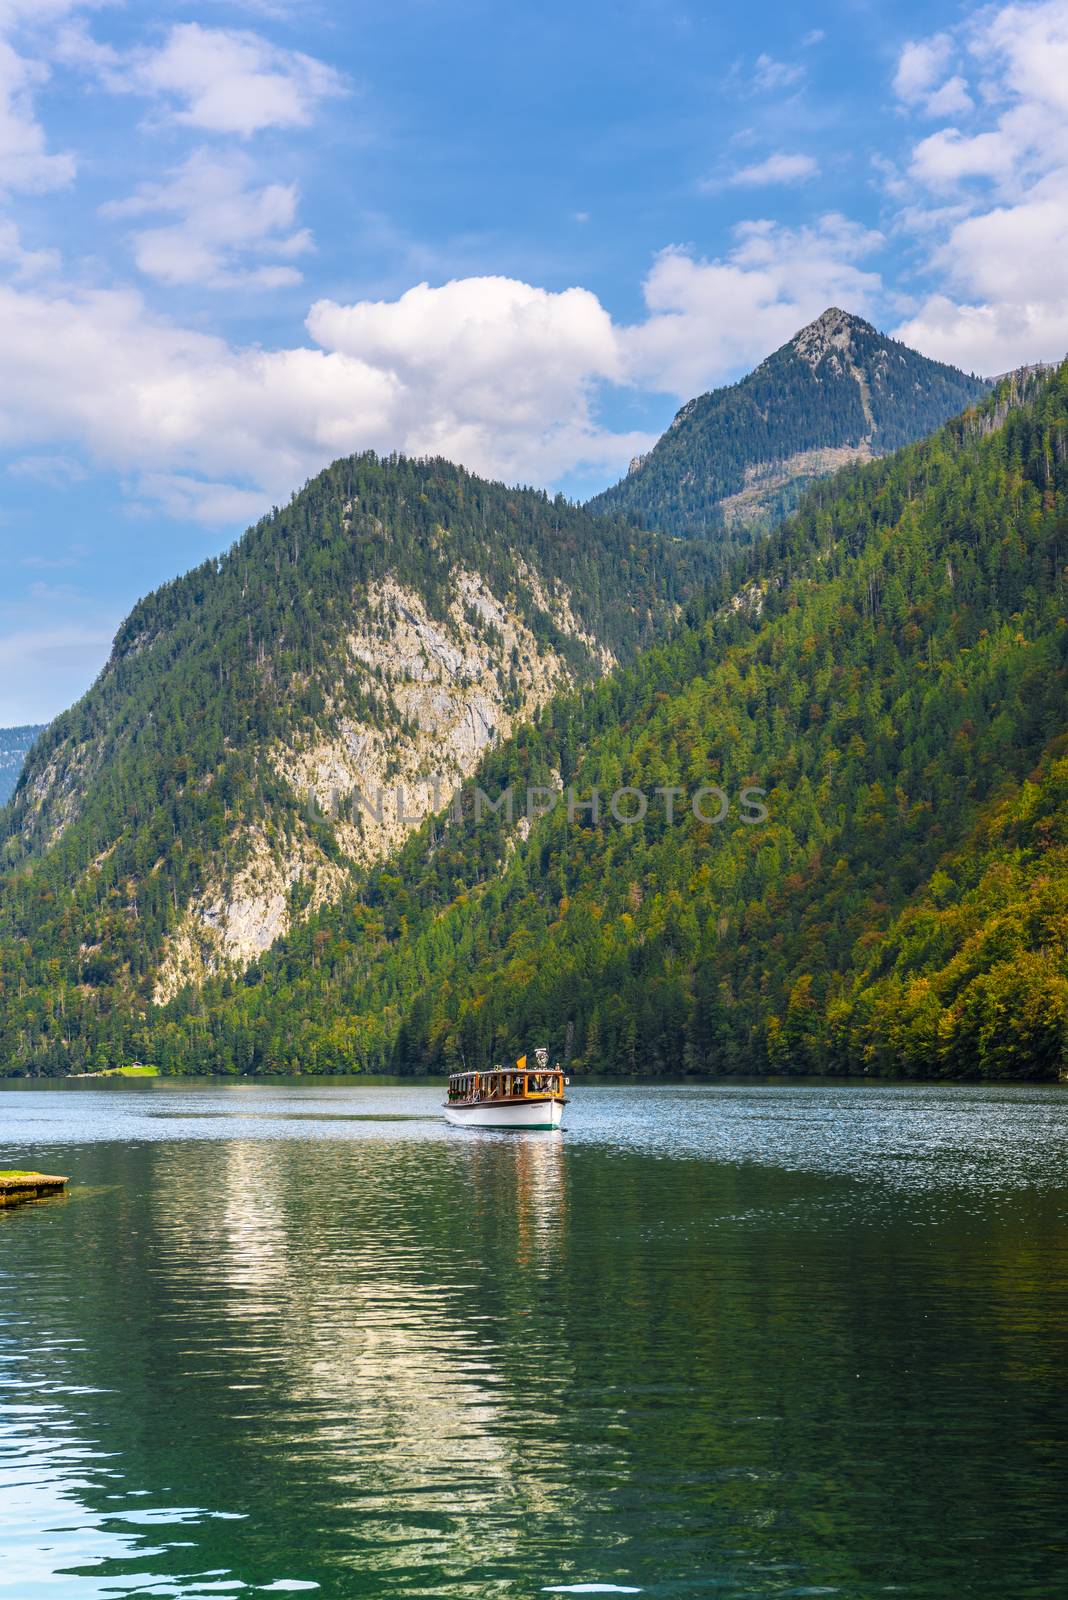 Electric boat in Koenigssee, Konigsee, Berchtesgaden National Park, Bavaria, Germany by Eagle2308